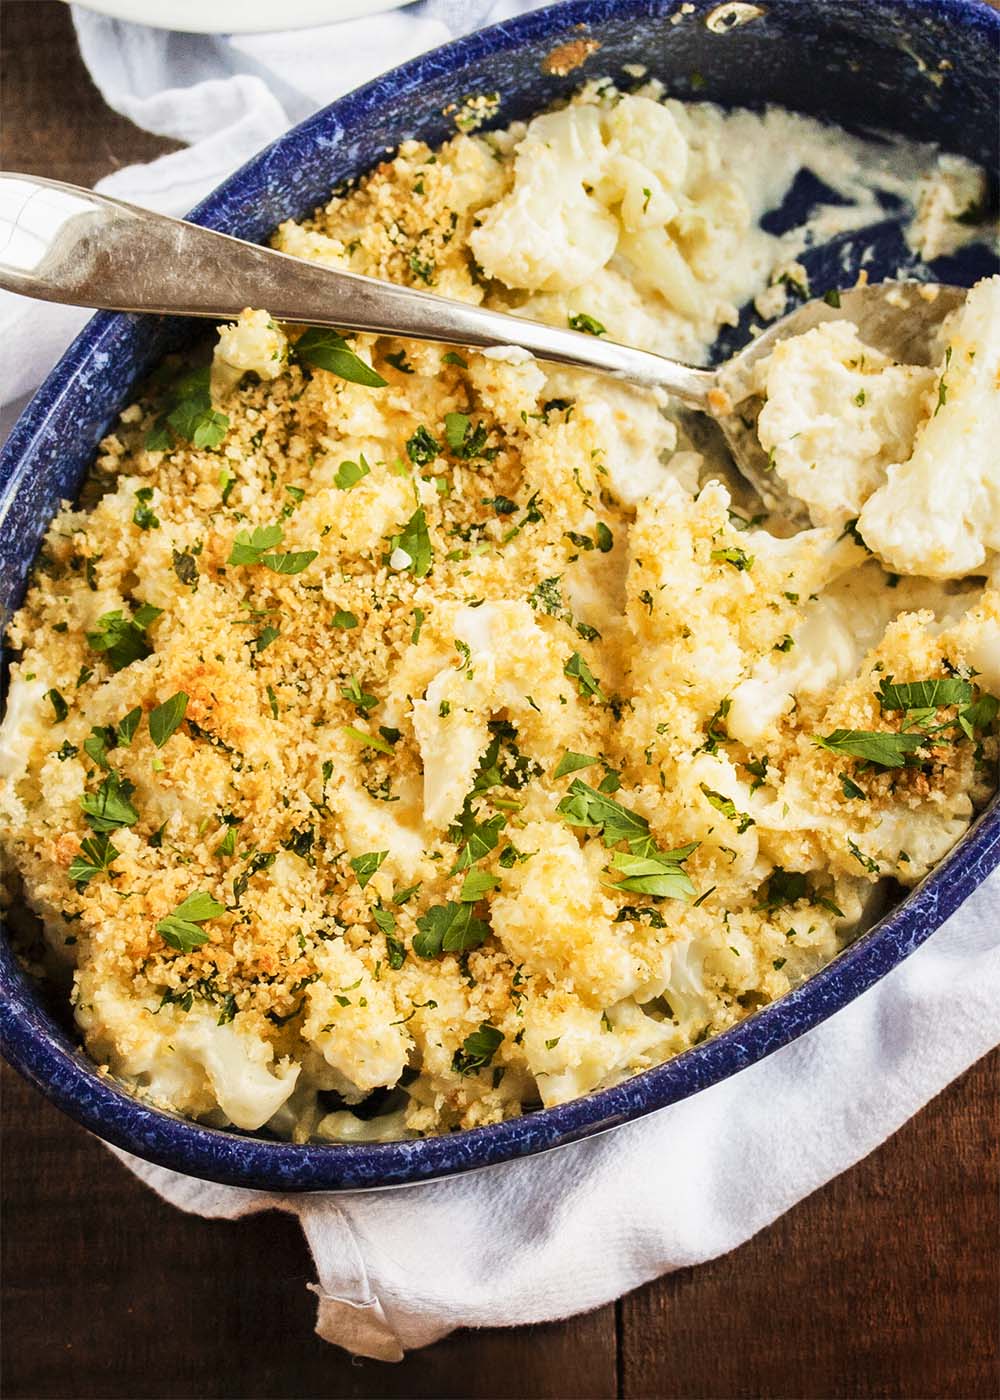 This Cauliflower Gratin in a Horseradish Cheese Sauce is comfort food that would be great on your holiday table or any other day of the year. A little spicy, a little creamy, a little cheesy, and a lot delicious. | justalittlebitofbacon.com